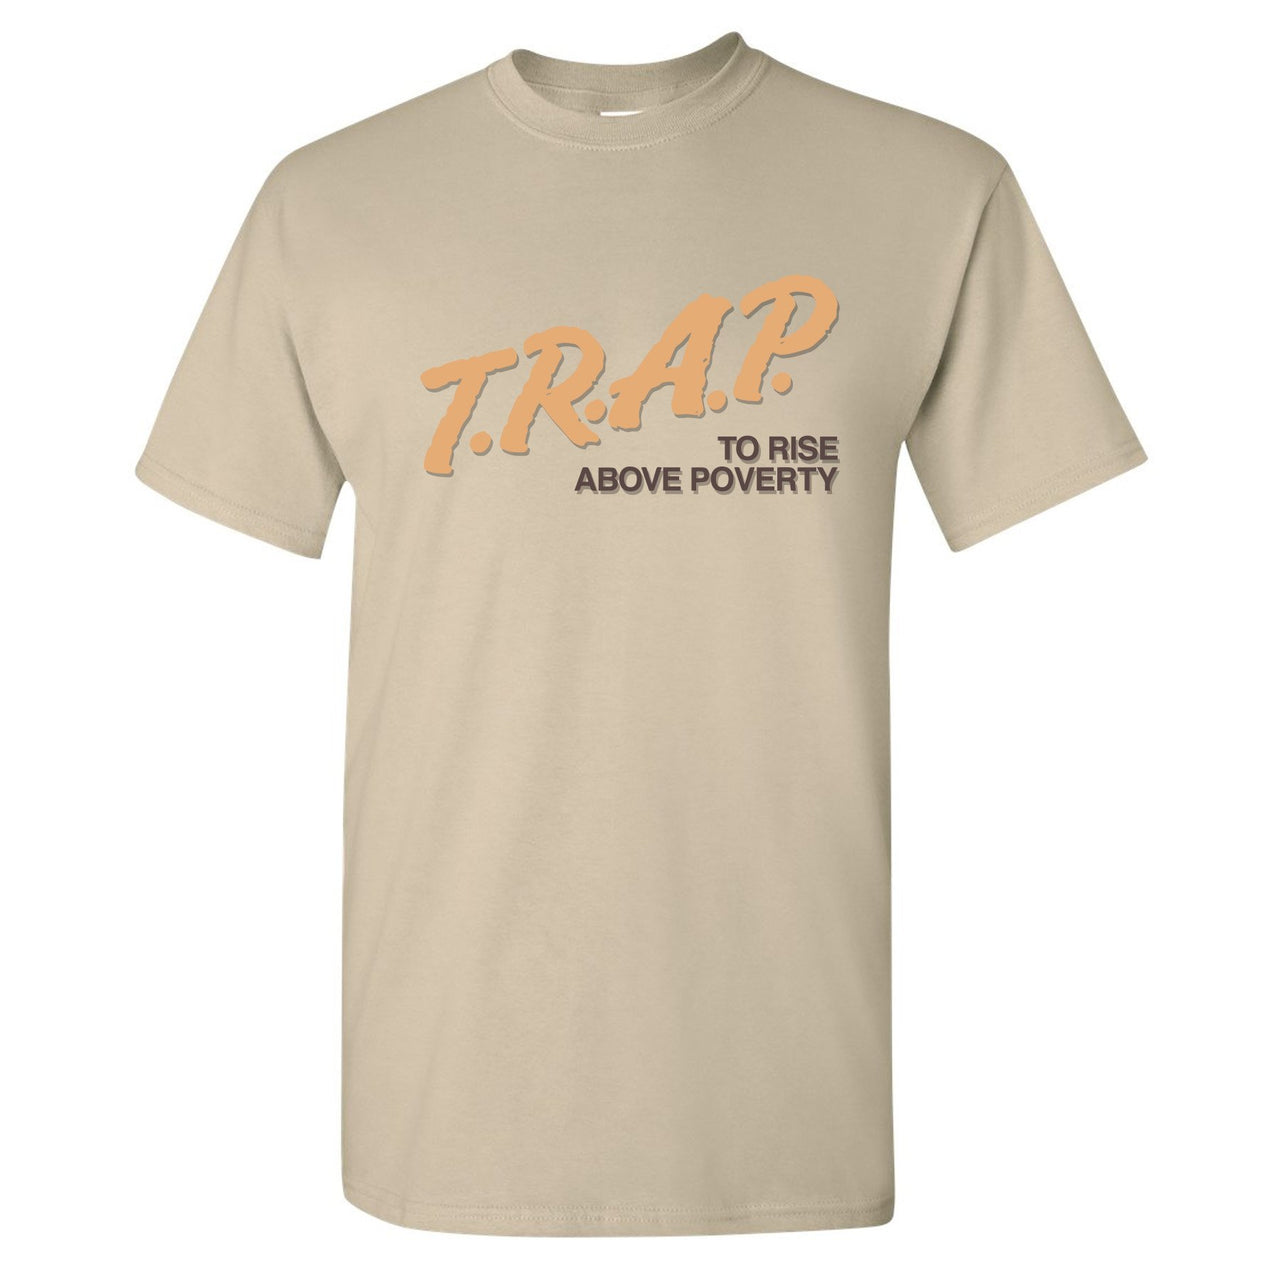 Clay v2 350s T Shirt | Trap To Rise Above Poverty, Sand